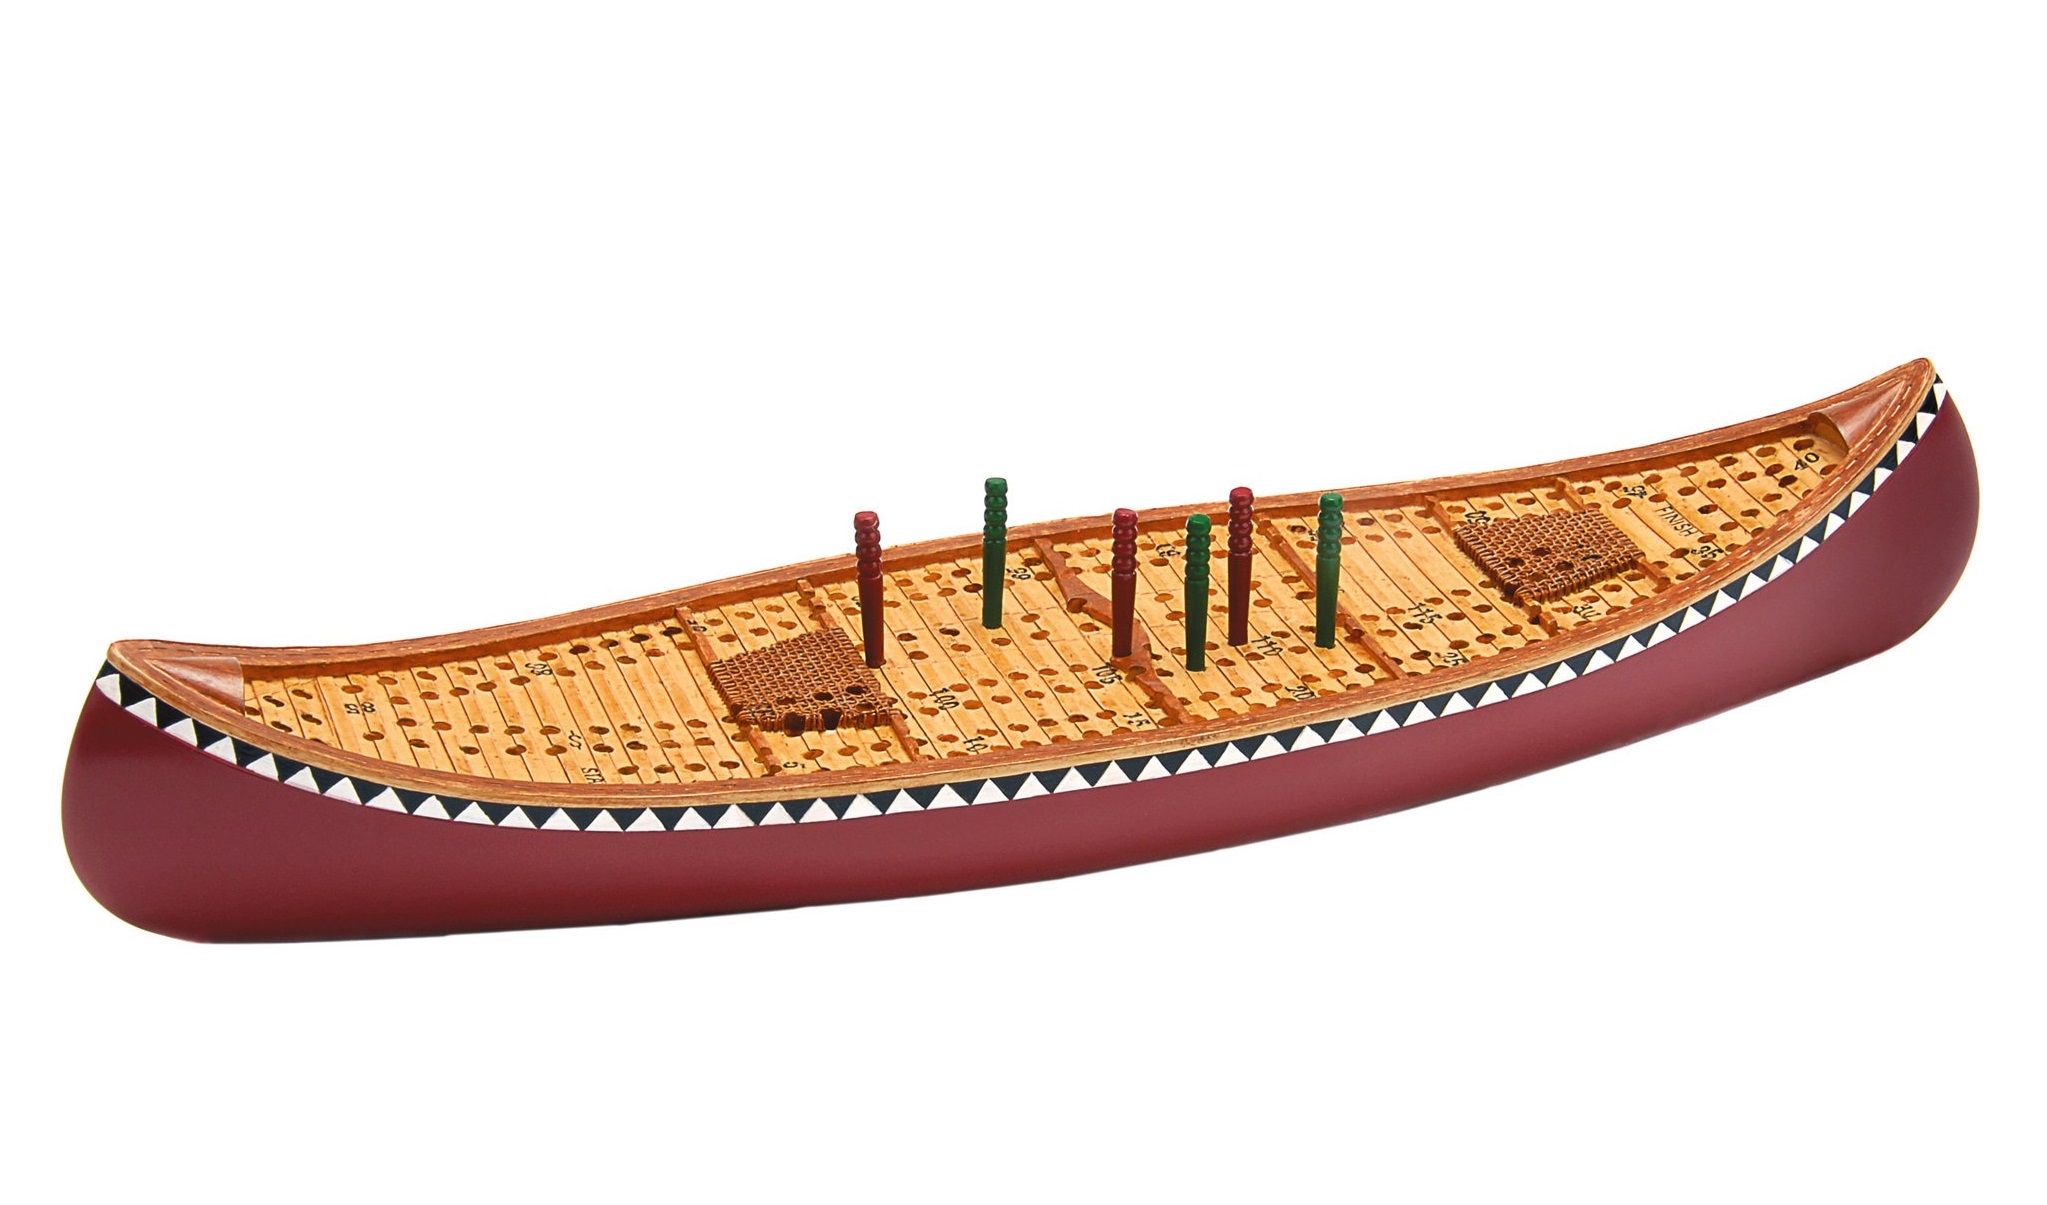 Gifts for the Cottage - Canoe Cribbage Board